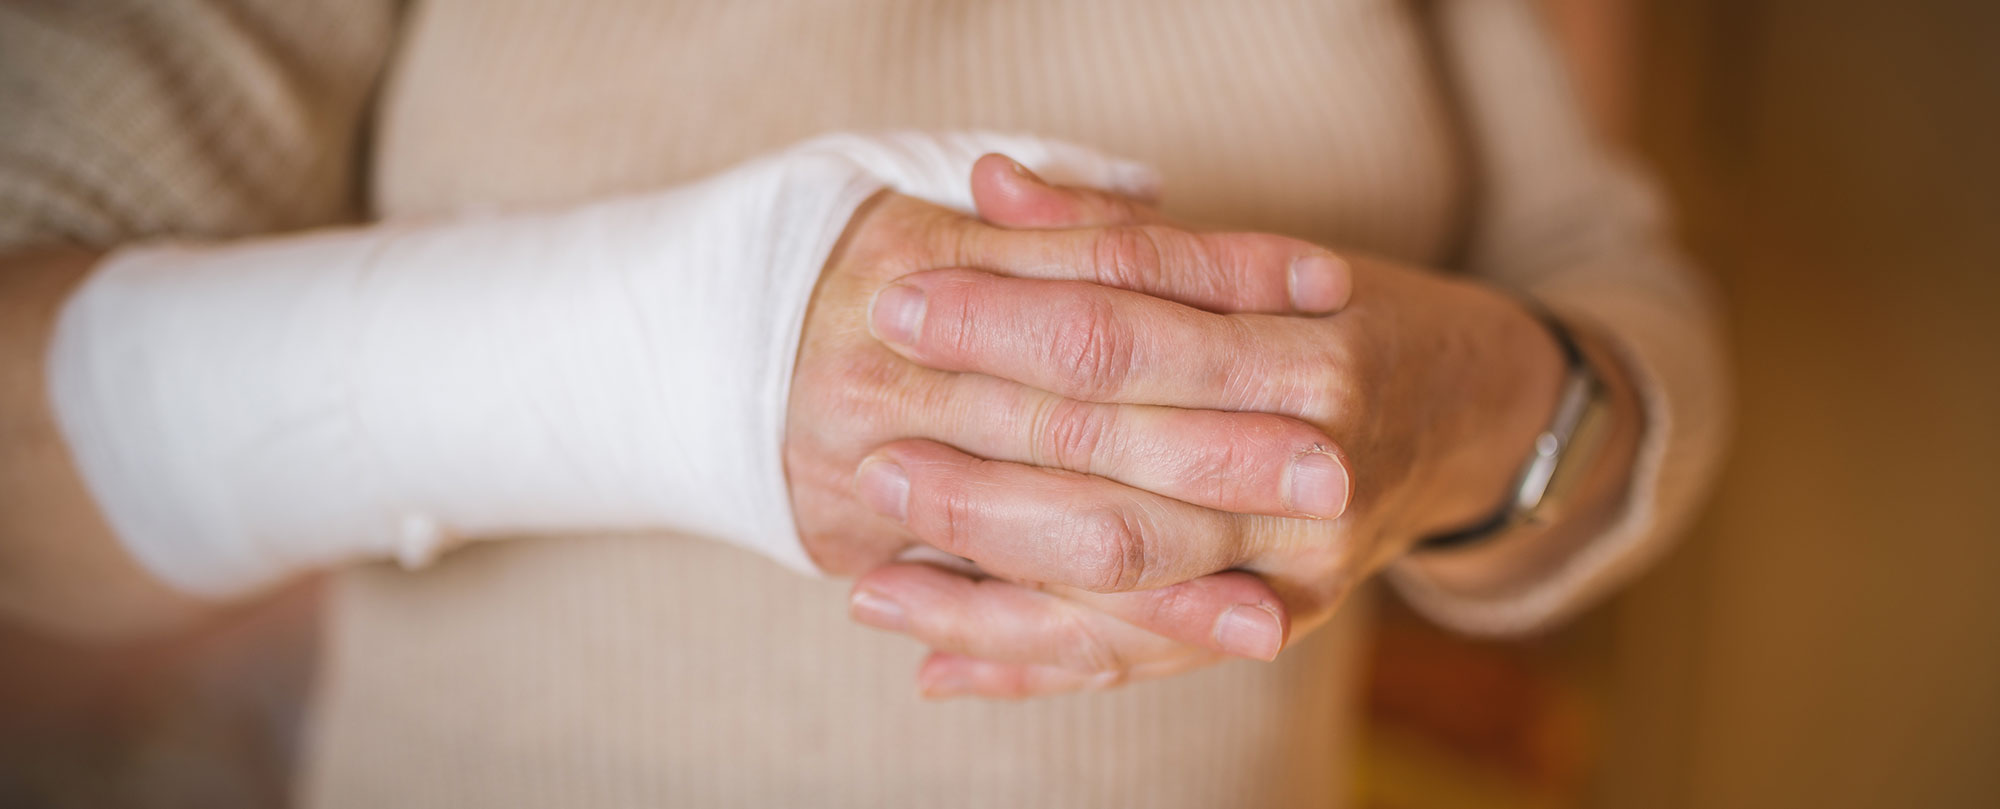 older person with arm bandaged from an accident injury